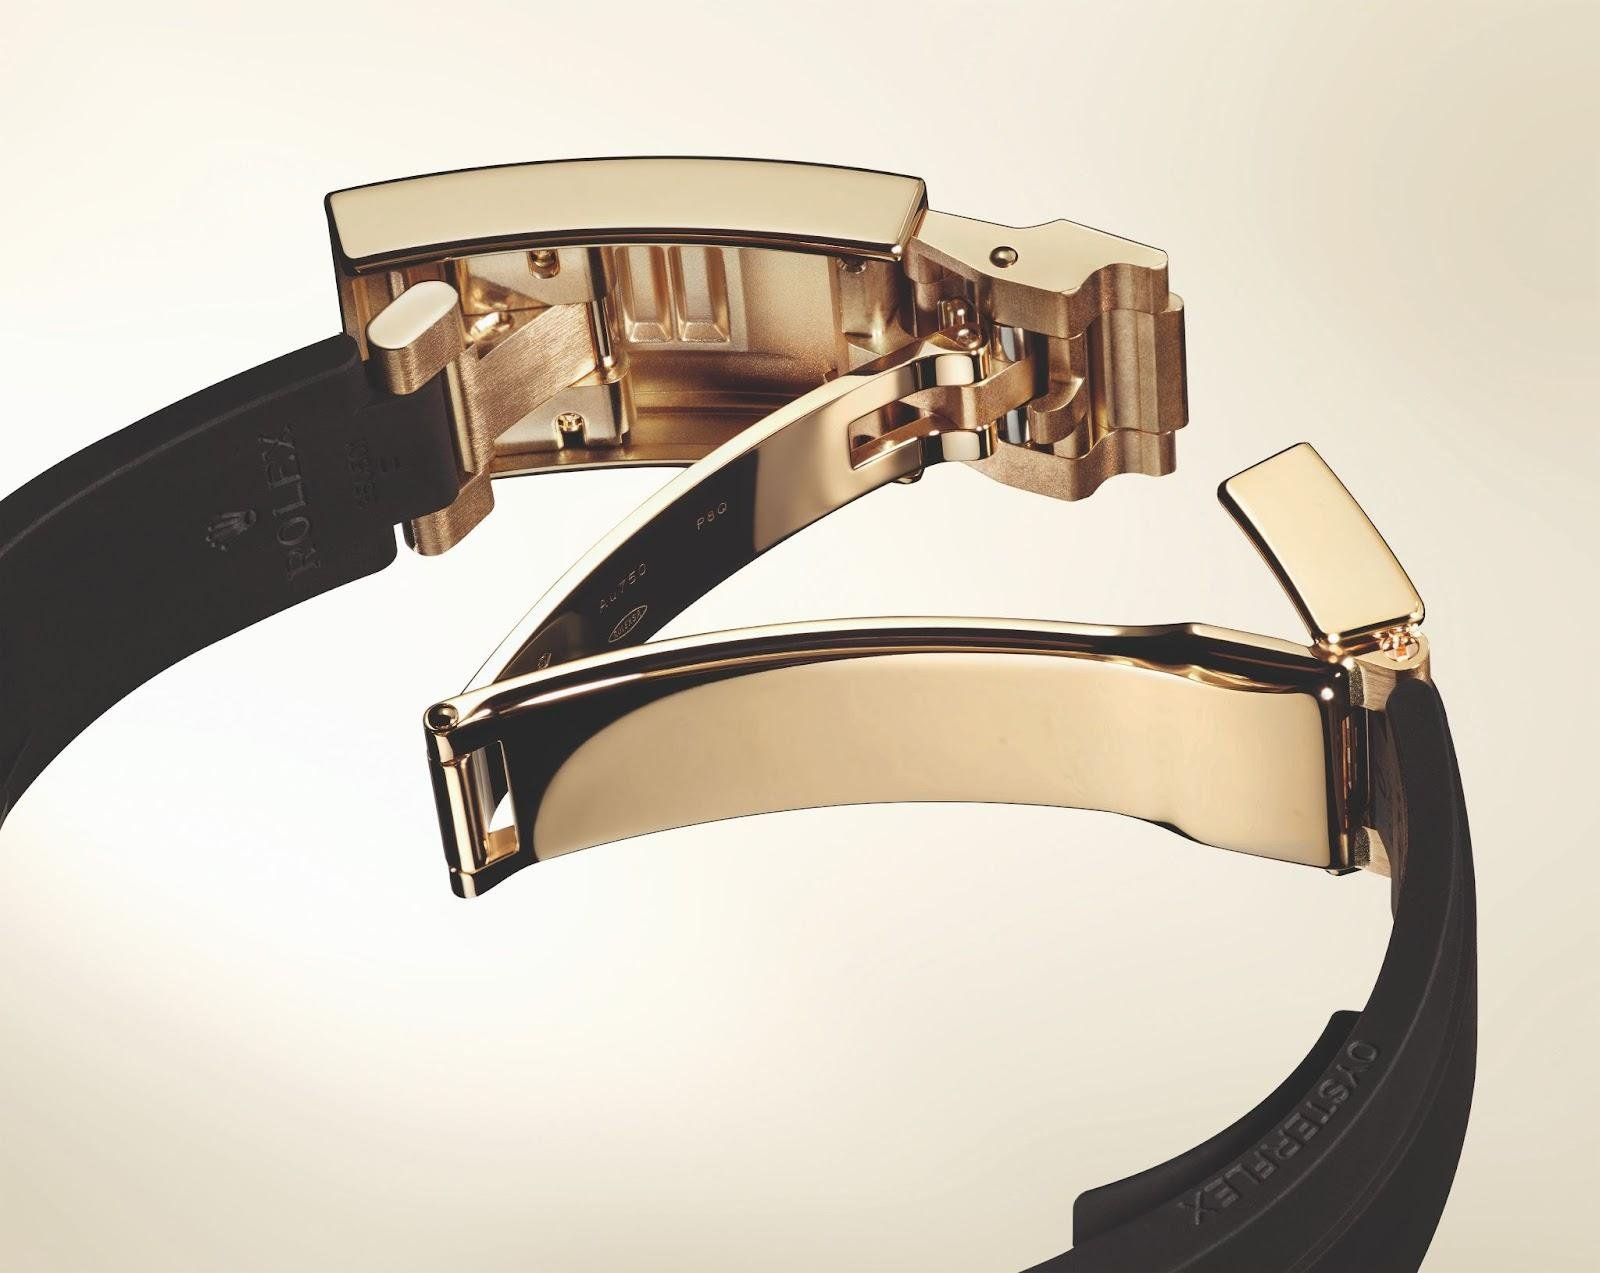 The Oyster Perpetual three-link bracelet